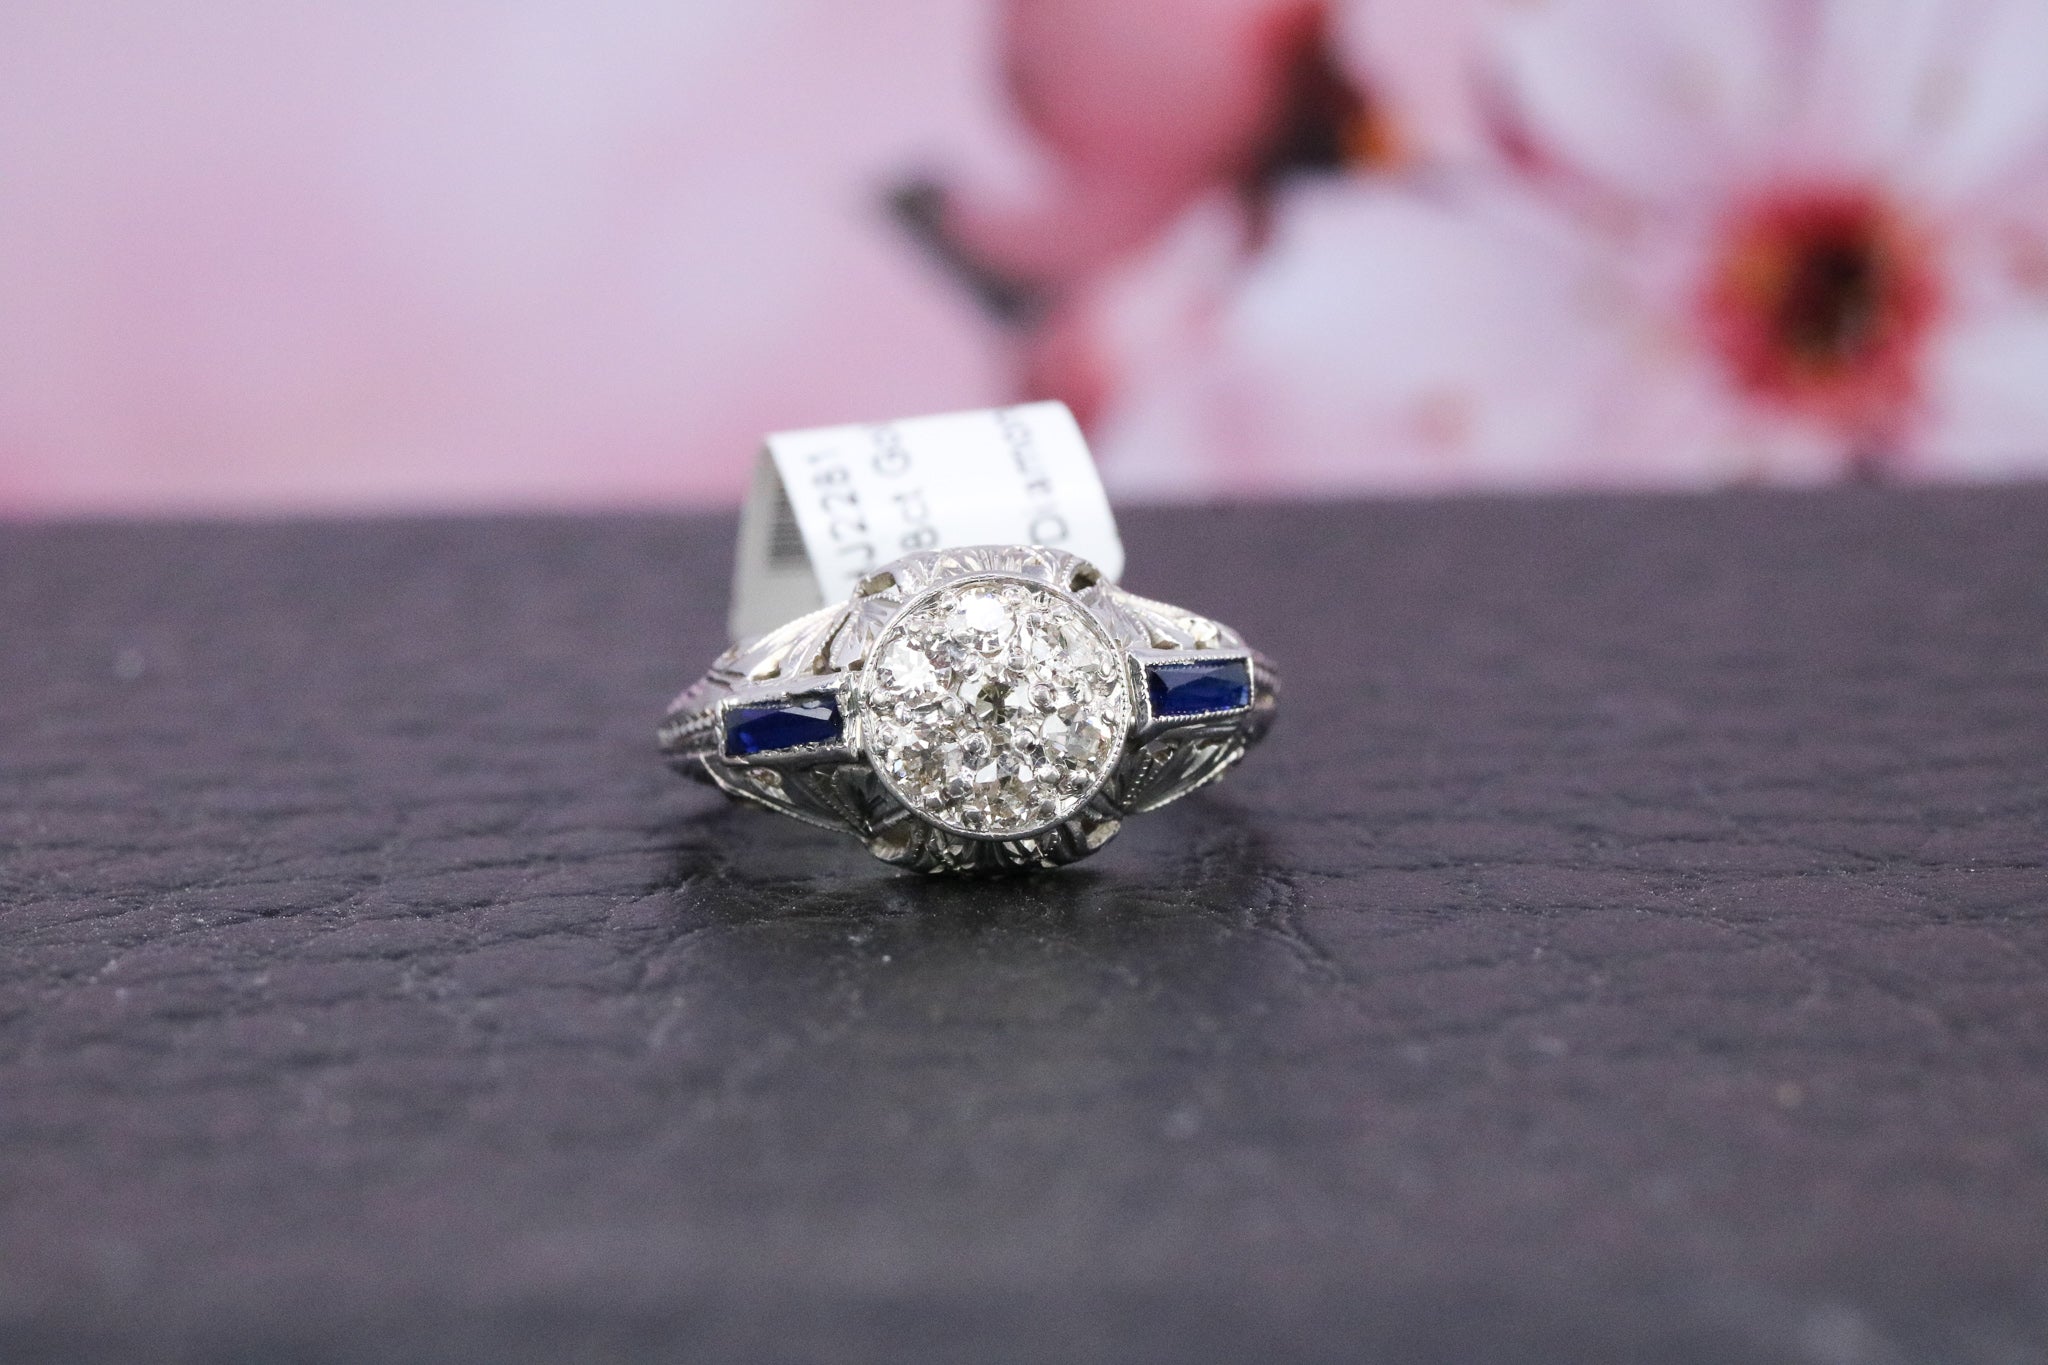 18ct White Gold Diamond Ring - HJ2281 - Hallmark Jewellers Formby & The Jewellers Bench Widnes